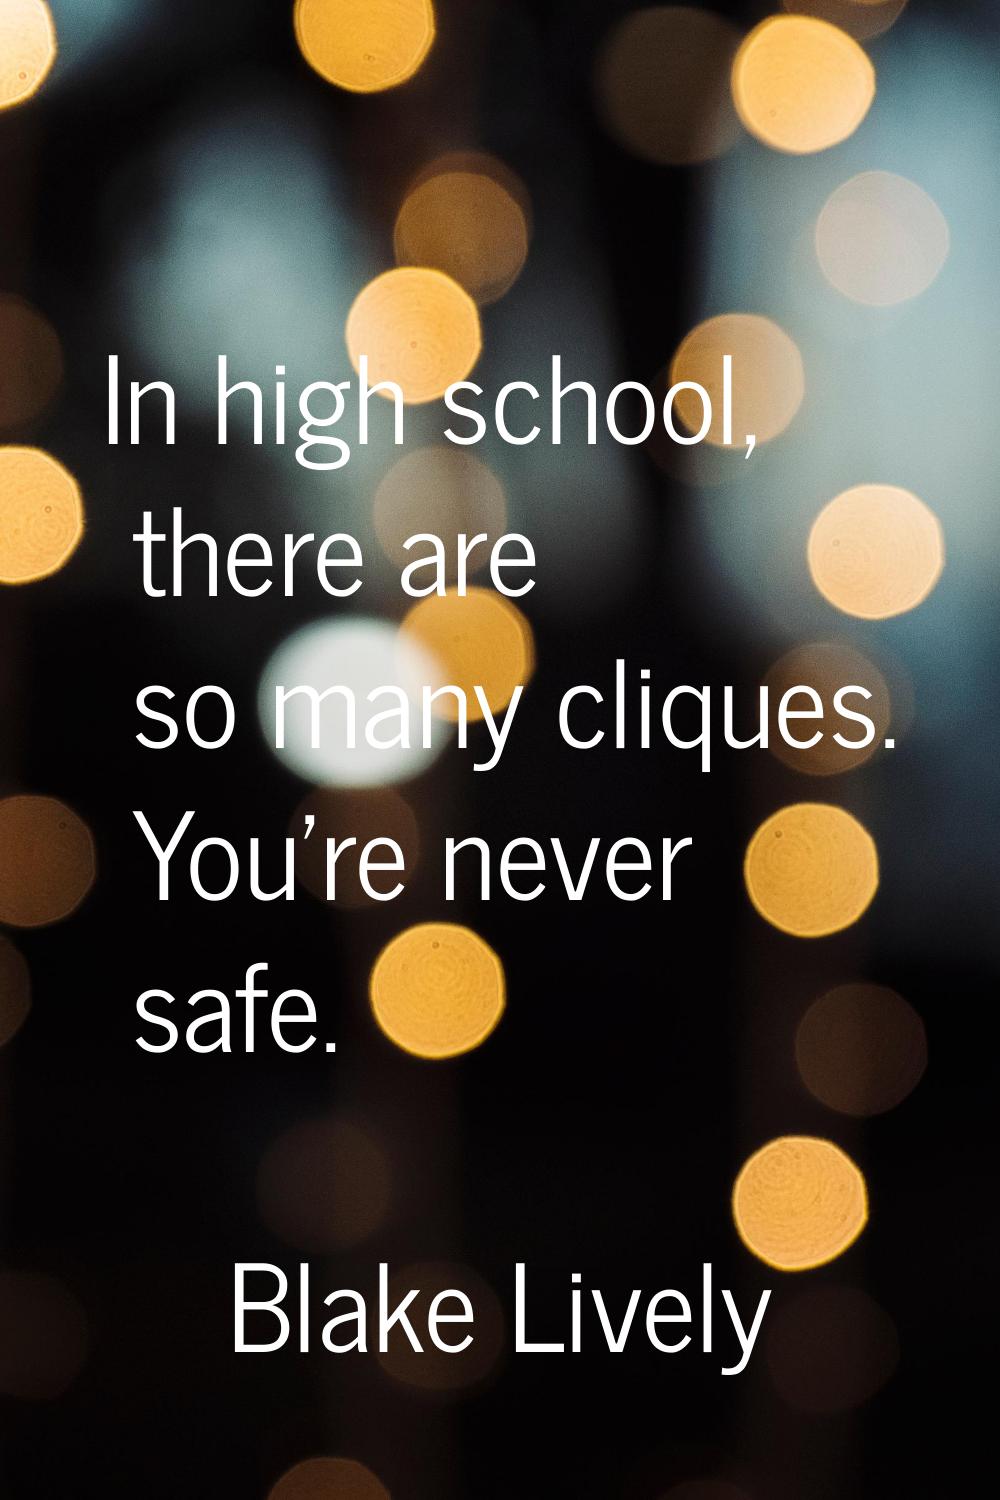 In high school, there are so many cliques. You're never safe.